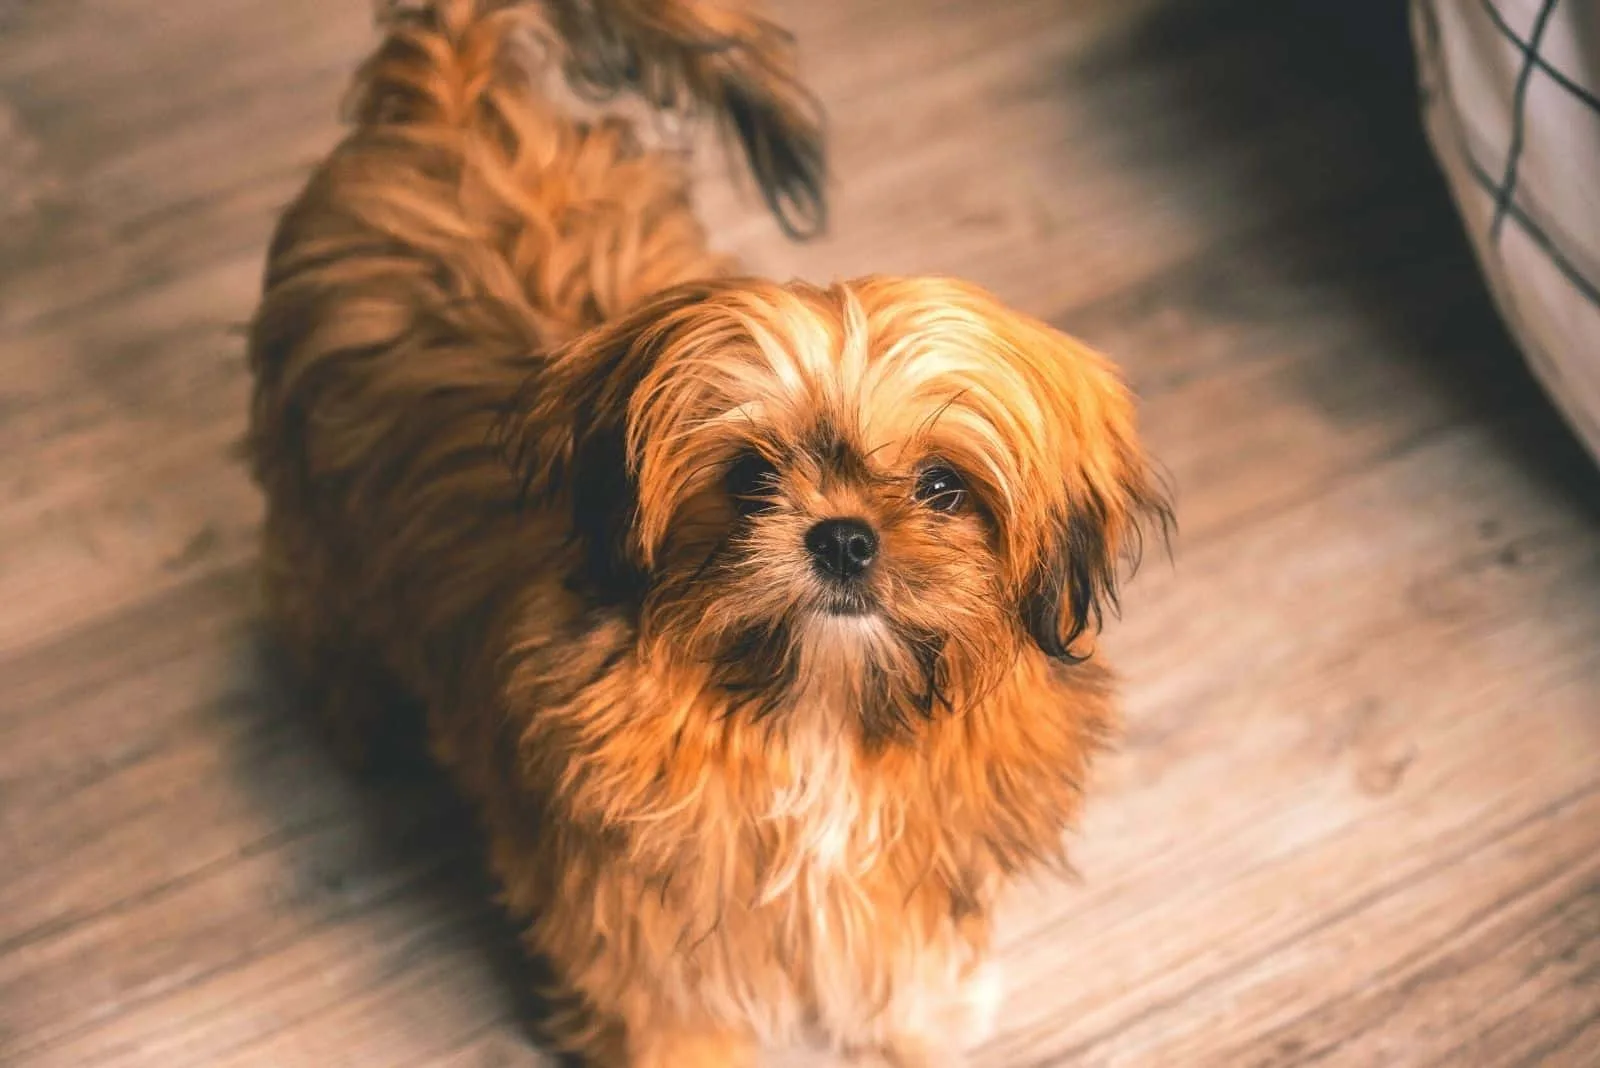 brown shih tzu puppy looking up at the camera inside home